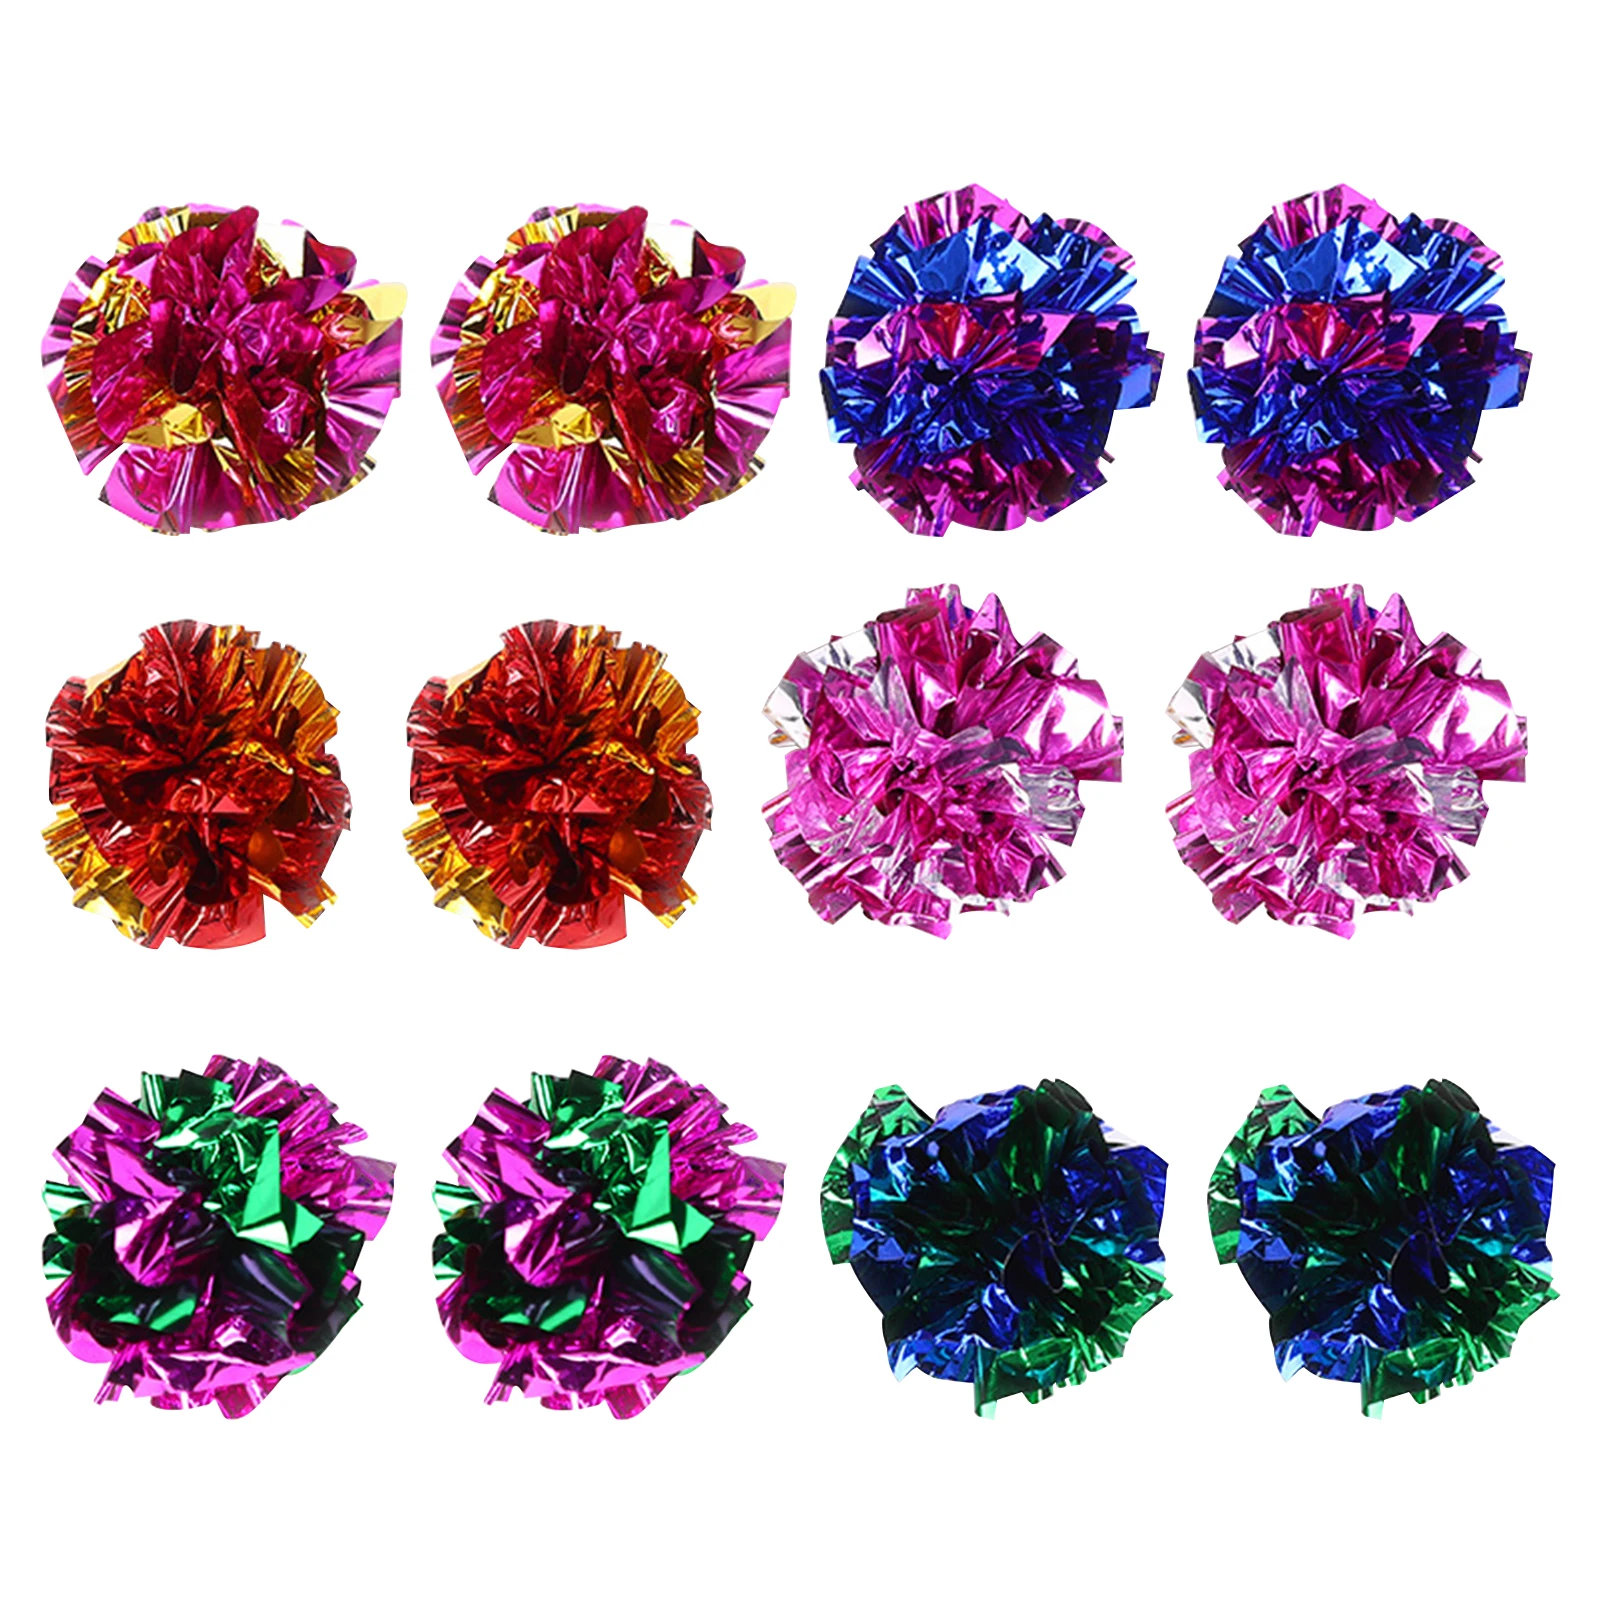 

12pcs/pack Kittens Pet Supplies Interactive Playing Squeaky Teaser Exercise Sparkle Cat Toy Chase Training Crinkle Ball Shiny